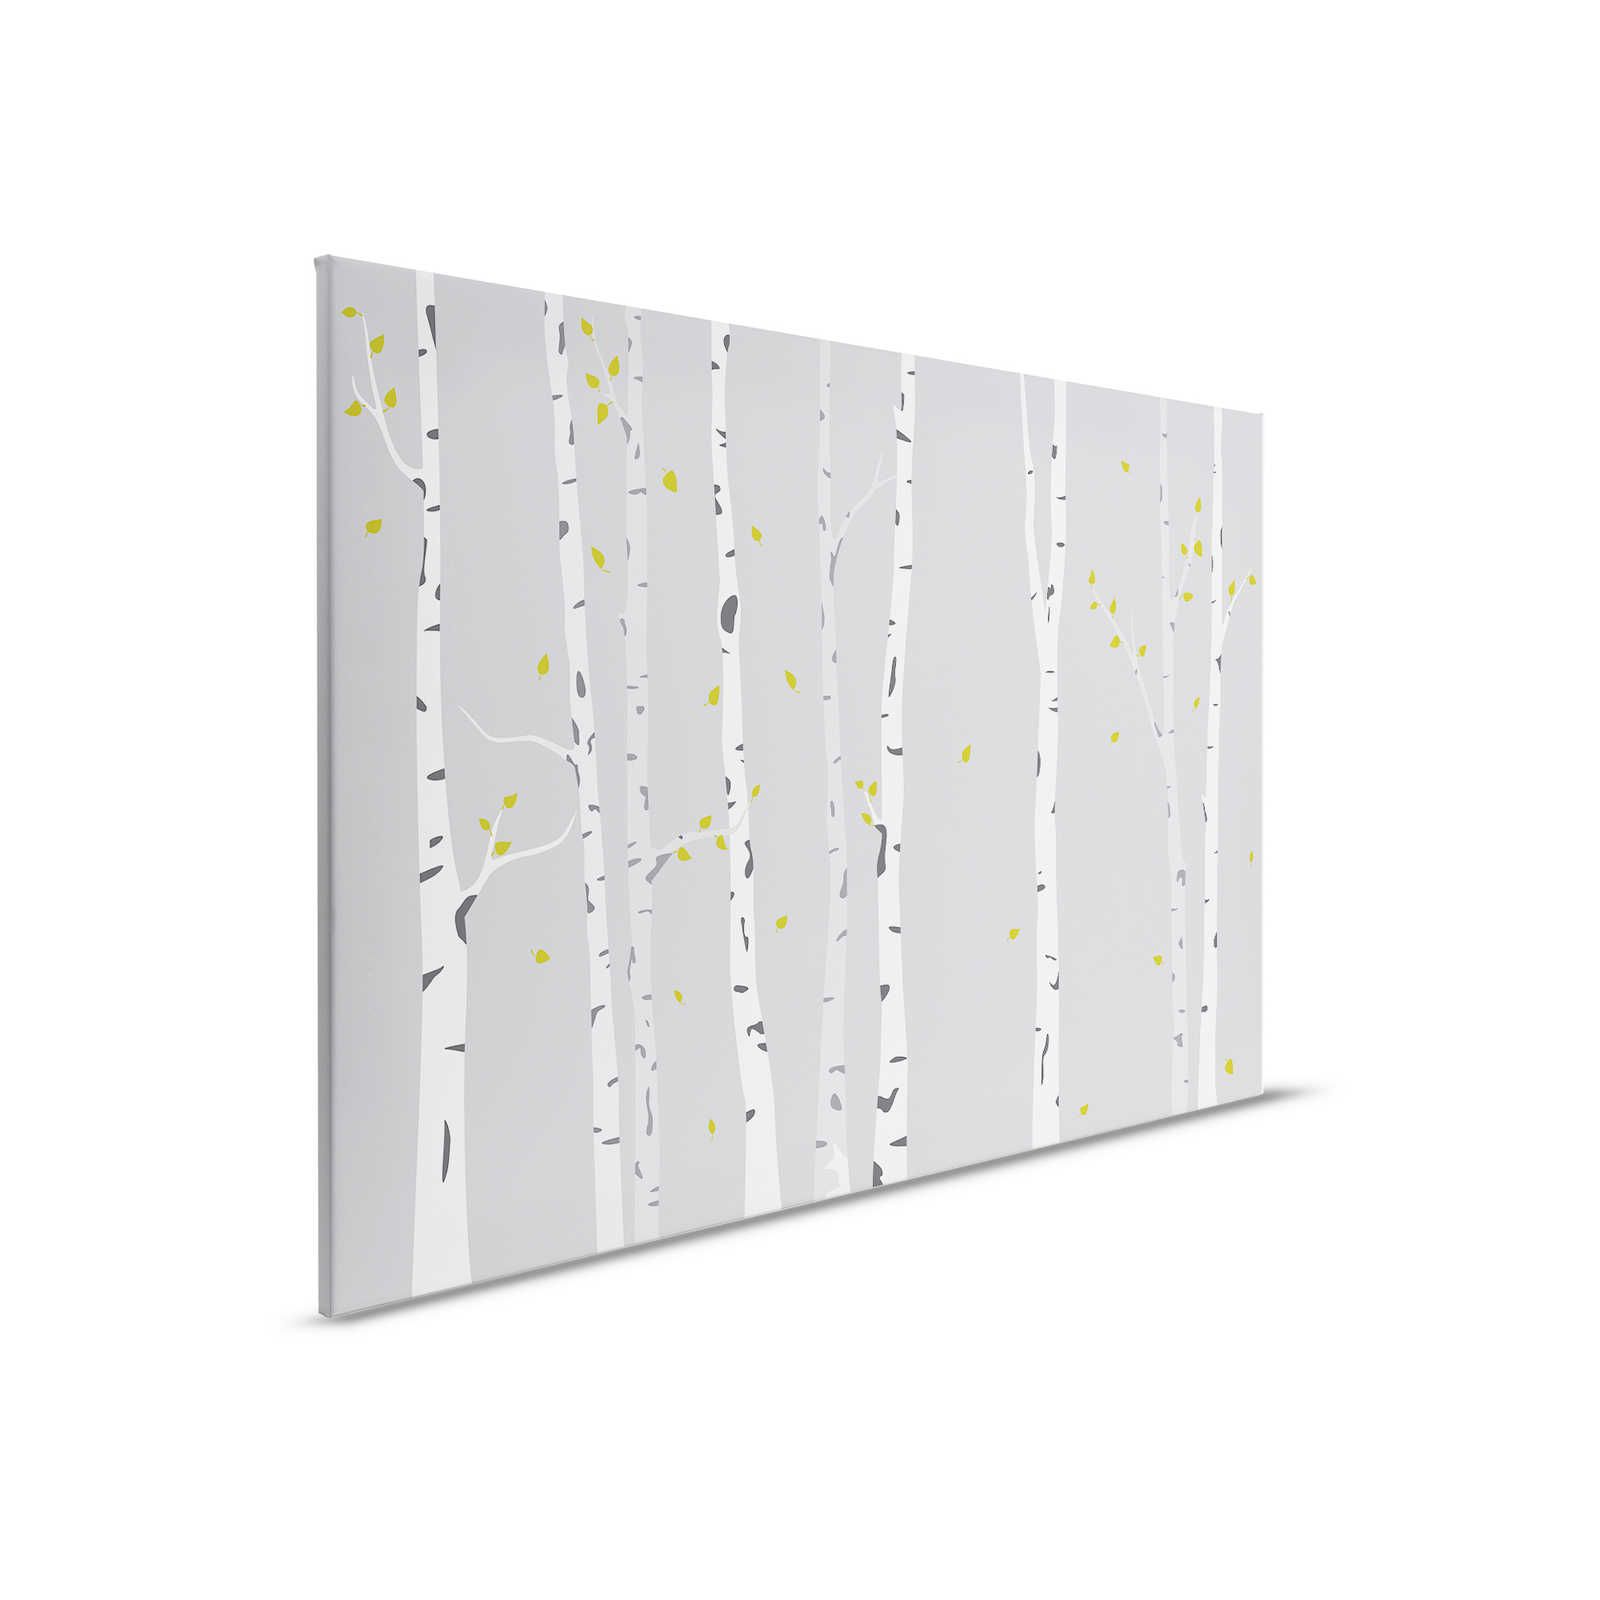         Canvas with painted birch forest for children's room - 90 cm x 60 cm
    